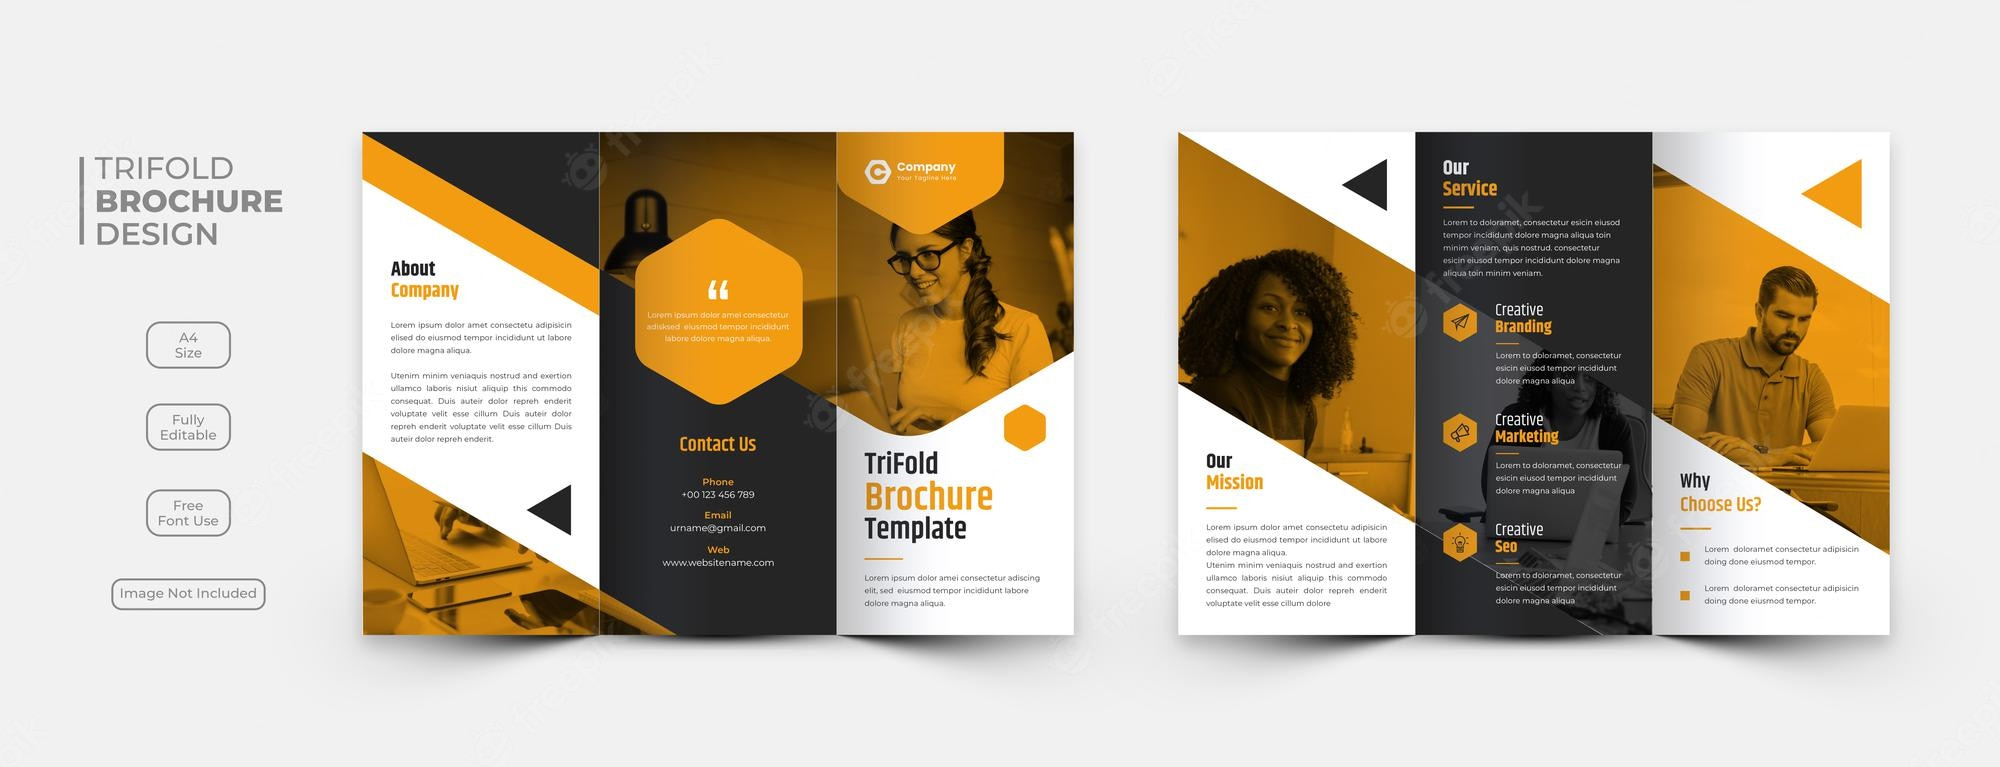 Brochure Images - Free Download on Freepik Pertaining To Free Brochure Template Downloads